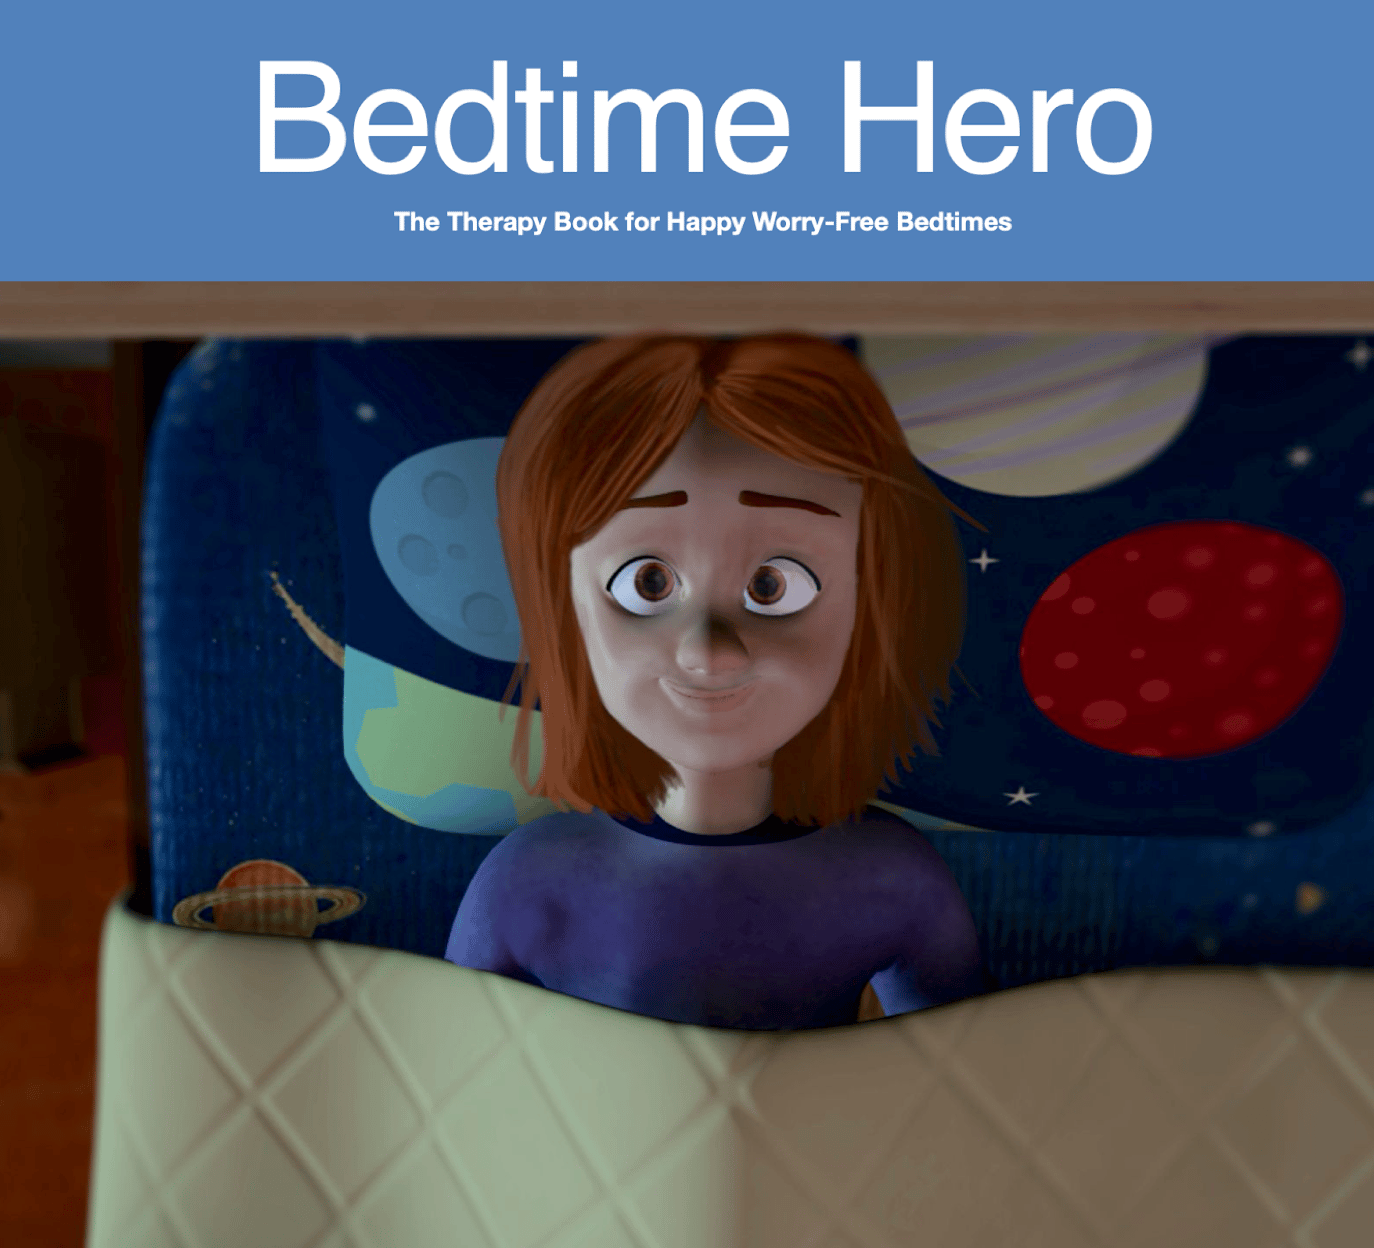 The therapy book for the child who is afraid of sleeping alone